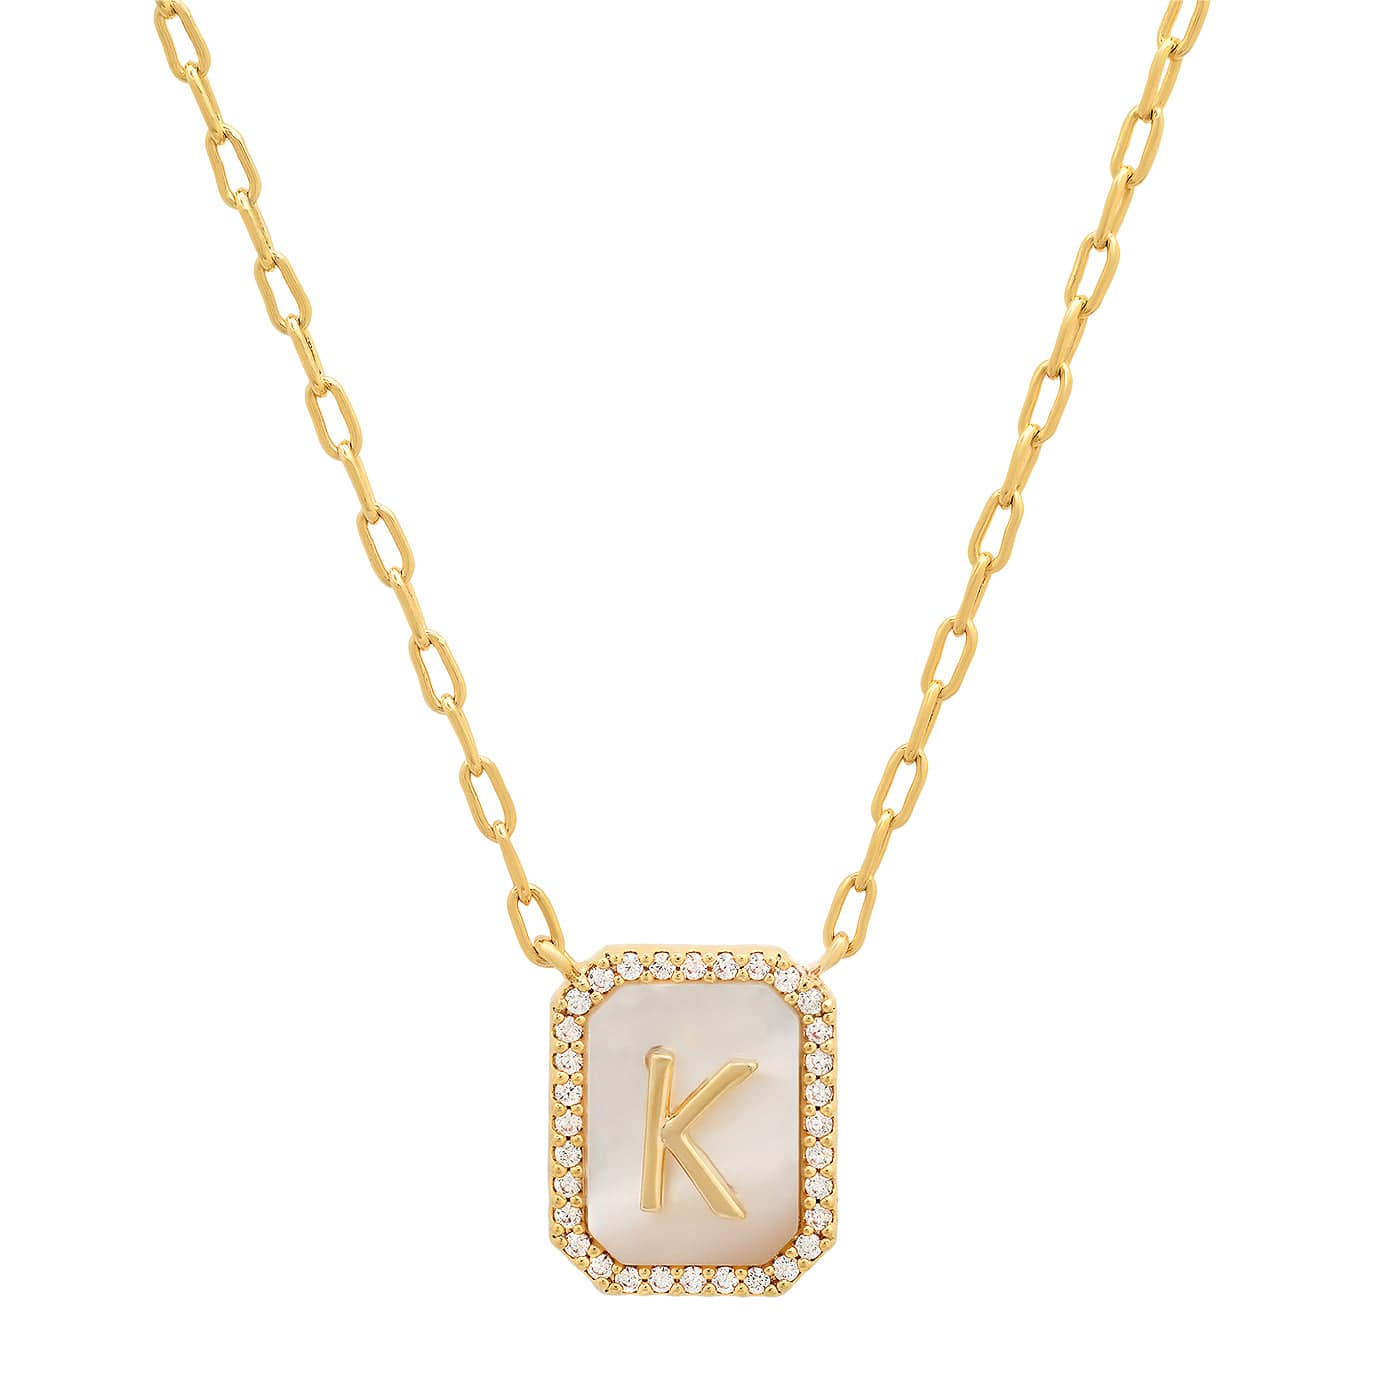 TAI JEWELRY Necklace K Mother Of Pearl Monogram Necklace